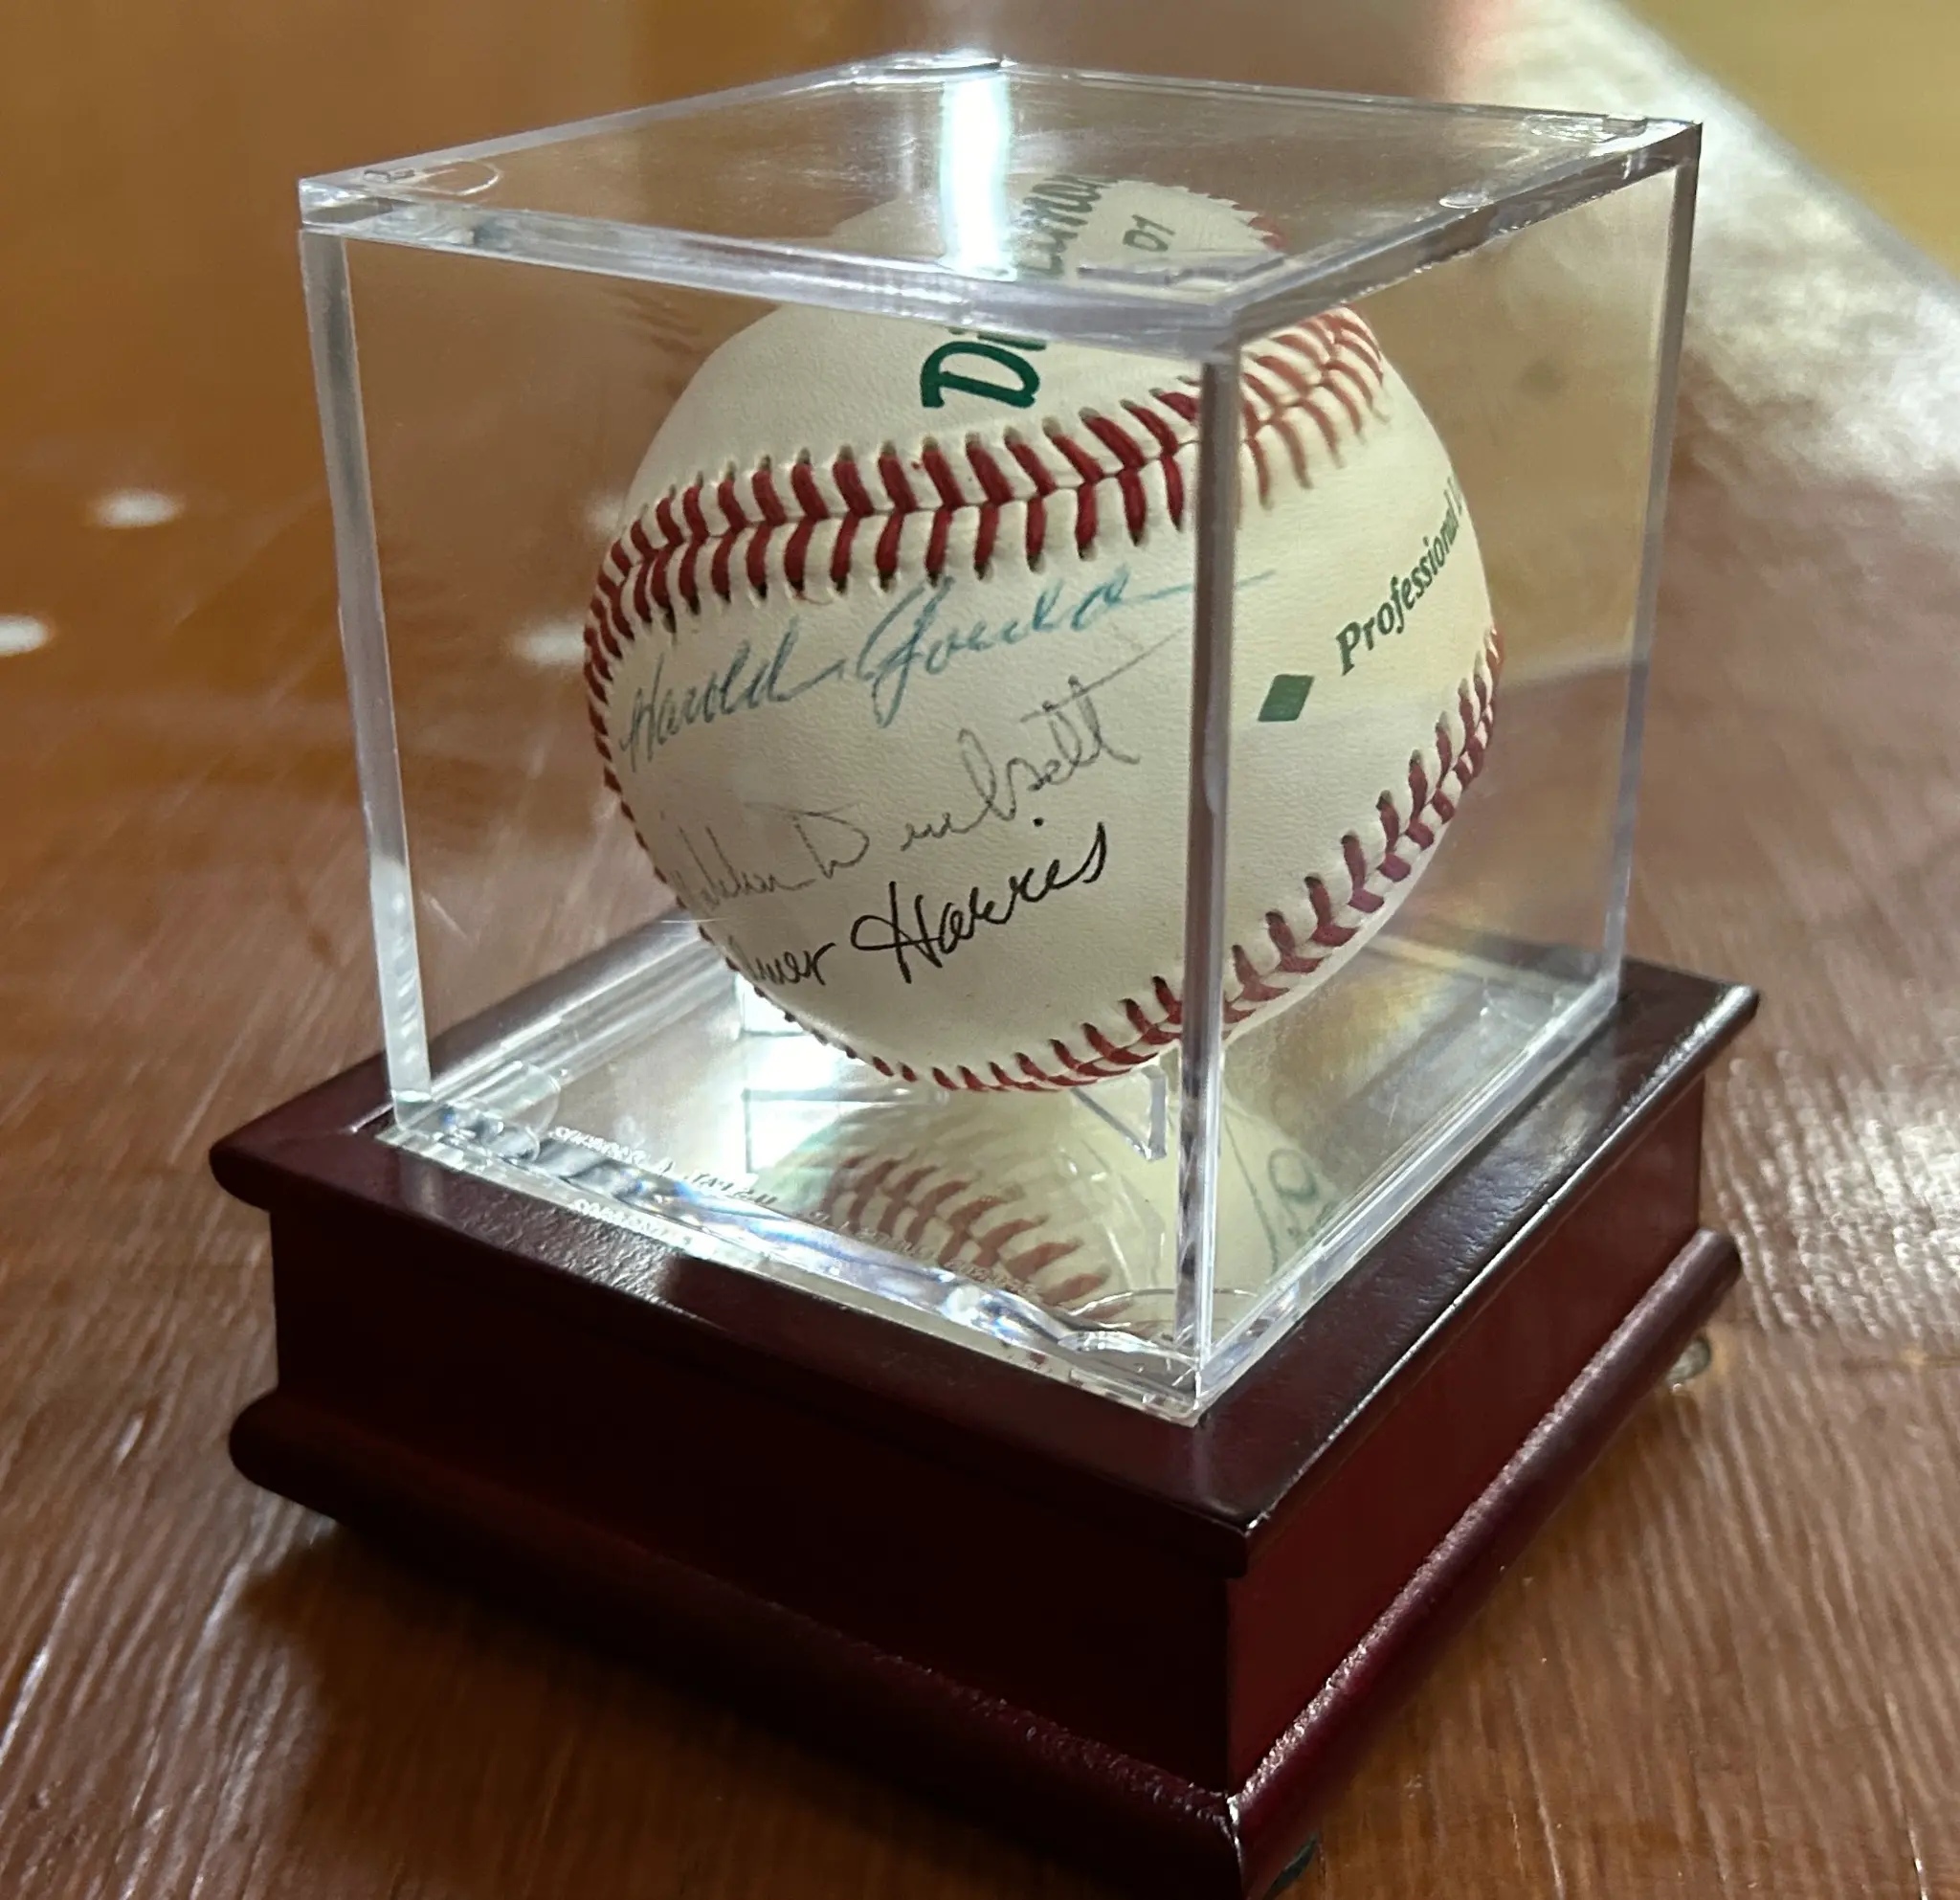 A baseball signed by players from the Philadelphia Stars.